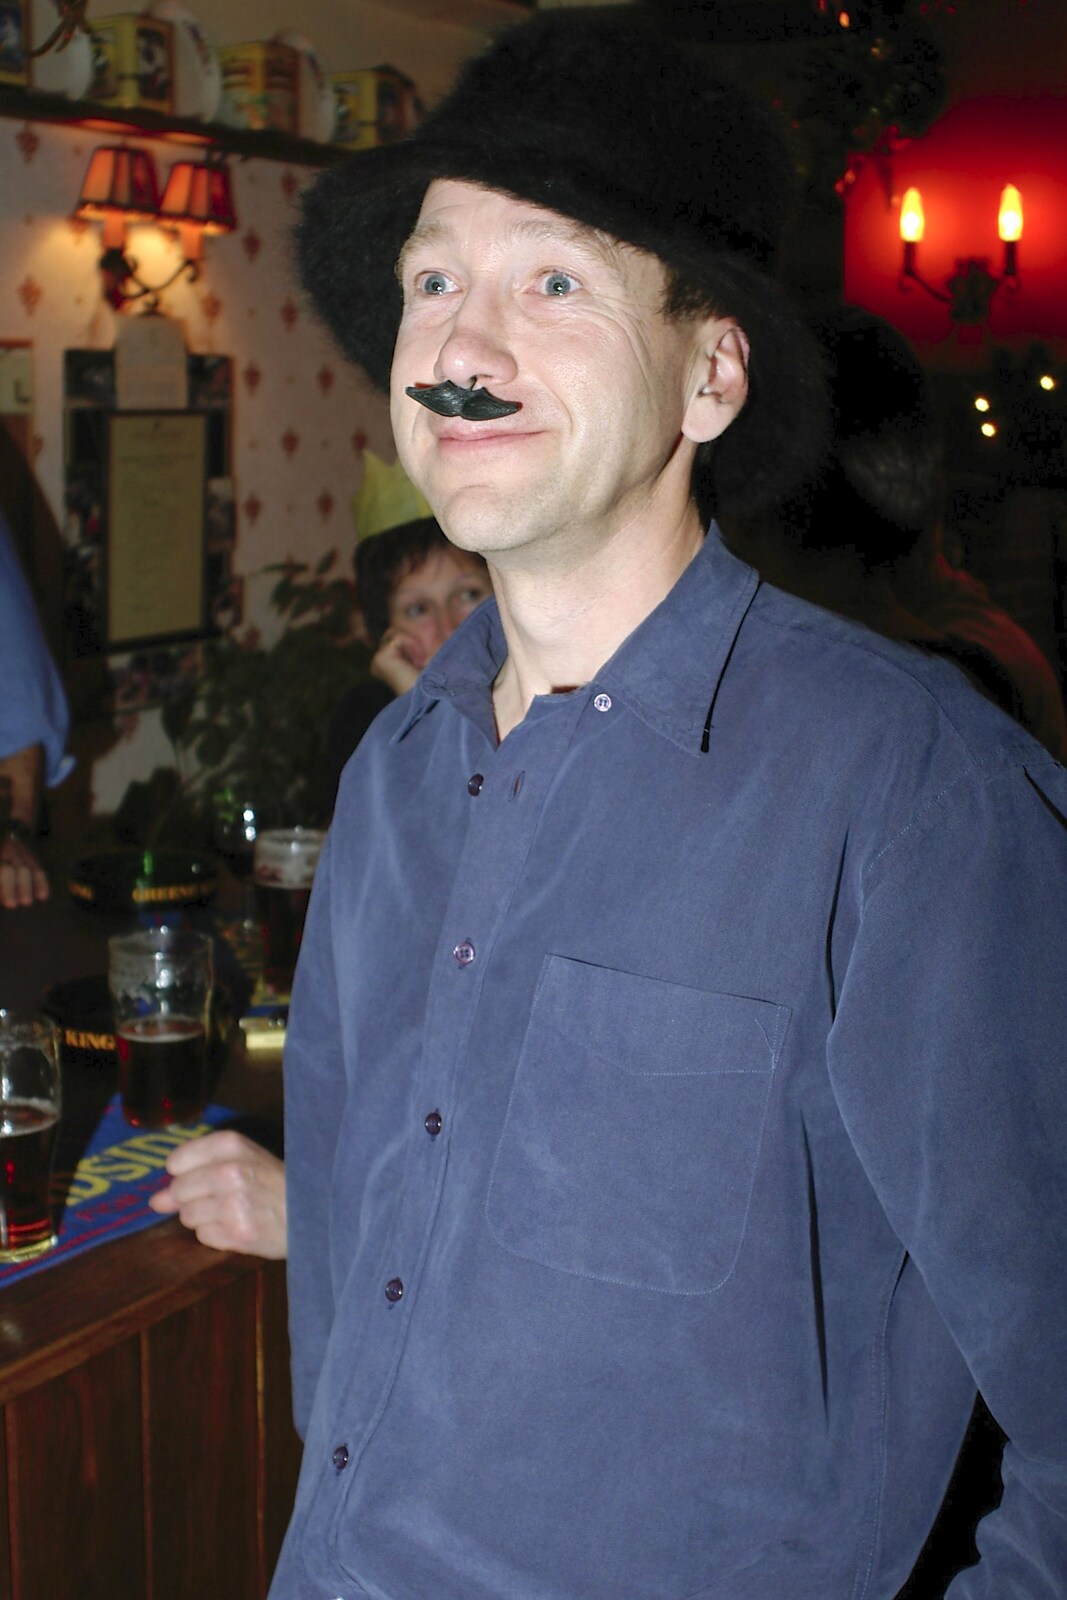 The BSCC Annual Dinner, The Brome Swan, Suffolk - 4th December 2004: Apple with a cracker moustache